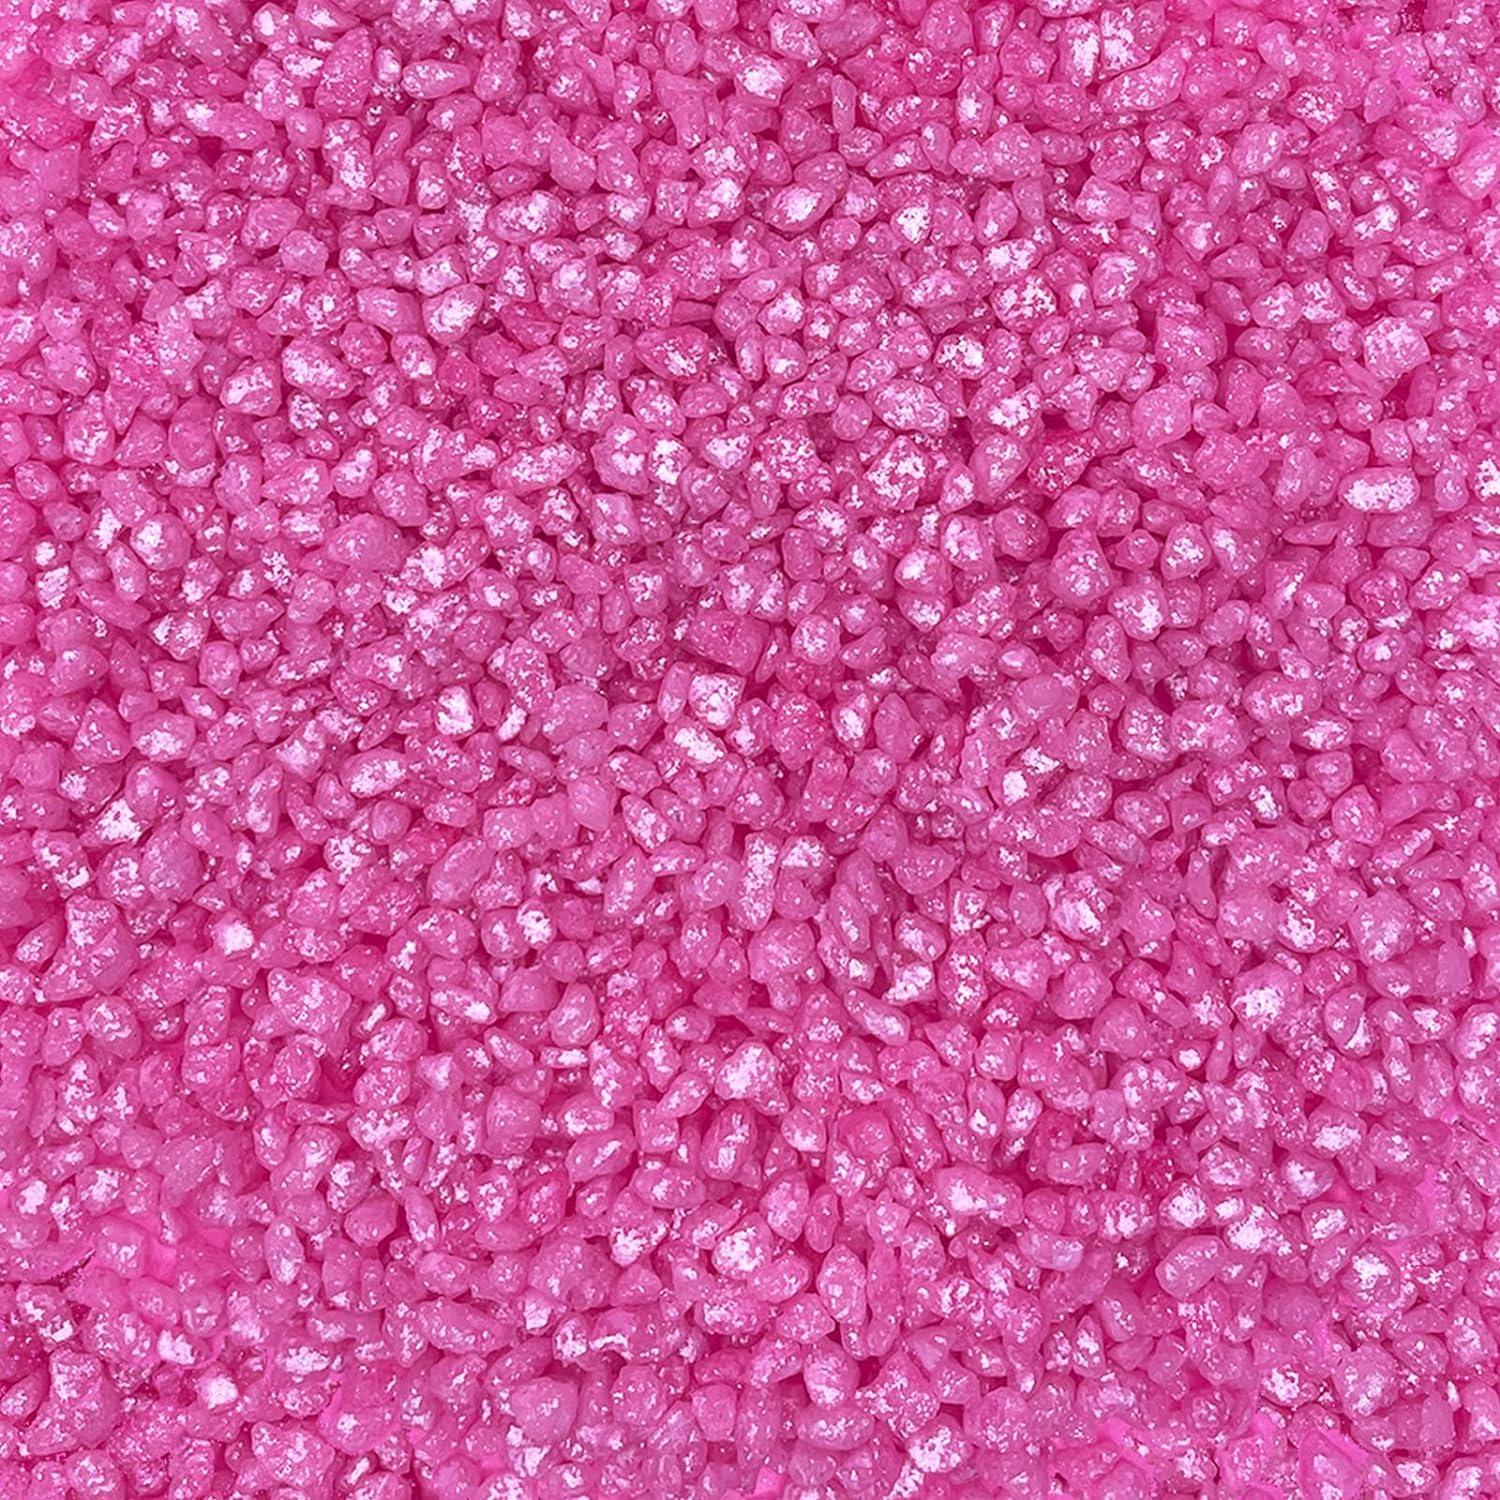 Edible Pink Glitter Coated Sugar Crystals 200g - Glimmer Pearl Sugar Nibs  for Baking - Sparkling Sugar Crystals for Cakes and Cupcakes Decoration -  Shimmer Shiny Coarse Sugar Pearls and Sprinkles